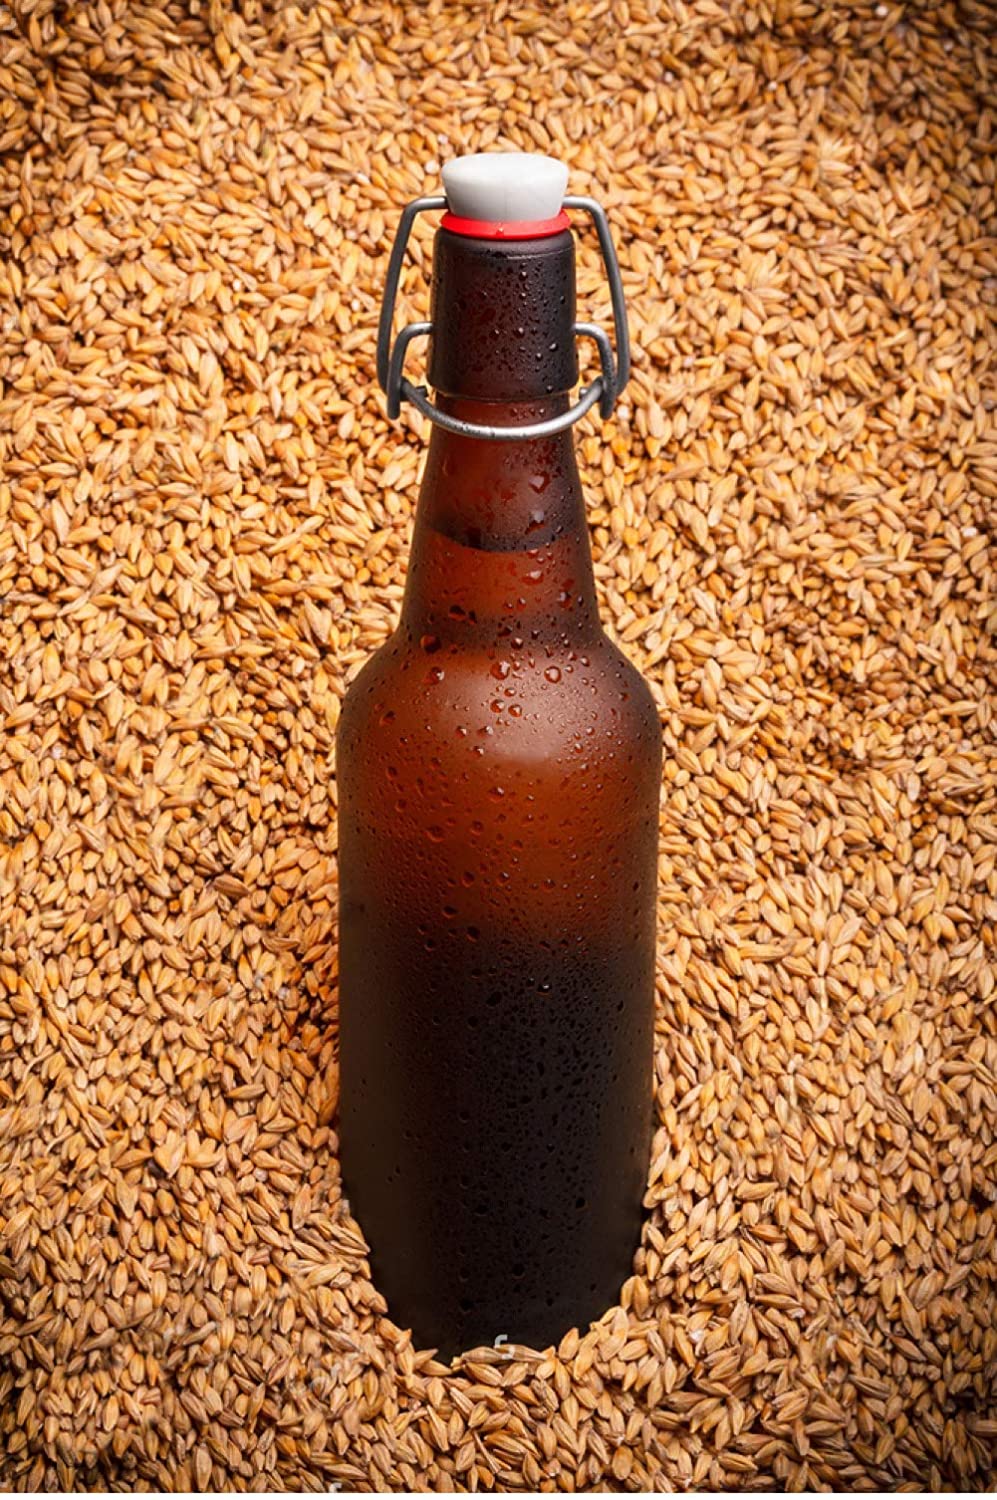 500ml Amber beer glass bottle with Swing lid amber beer bottle for beer factory 375ml